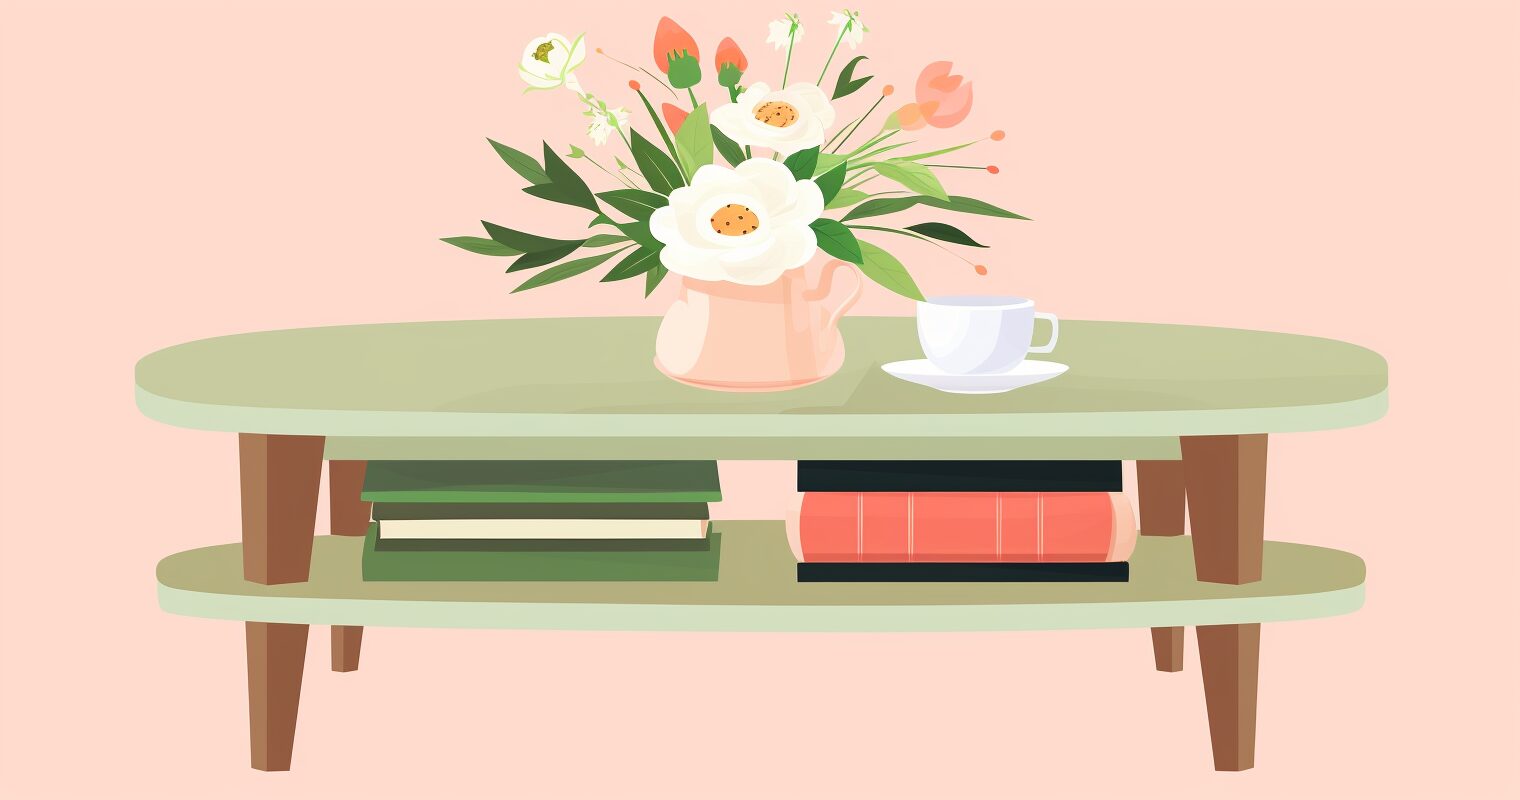 A coffee table with books, a teacup and a vase of flowers.